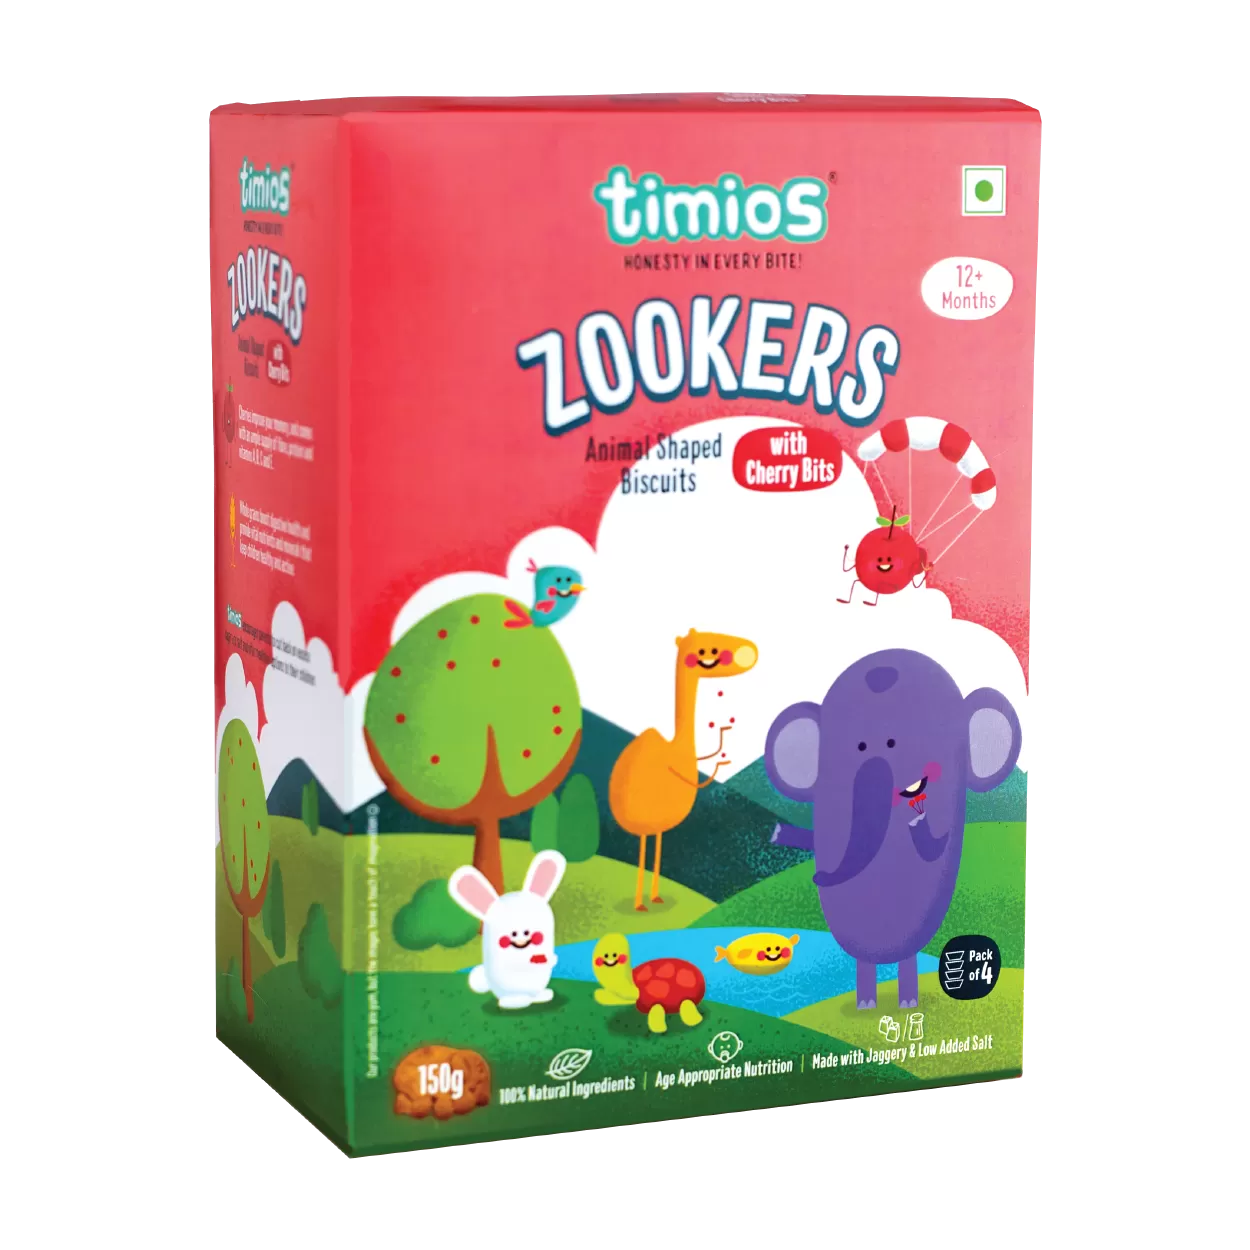 Timios Zookers Cherry Bits Animal Shaped Biscuits for Toddlers Image